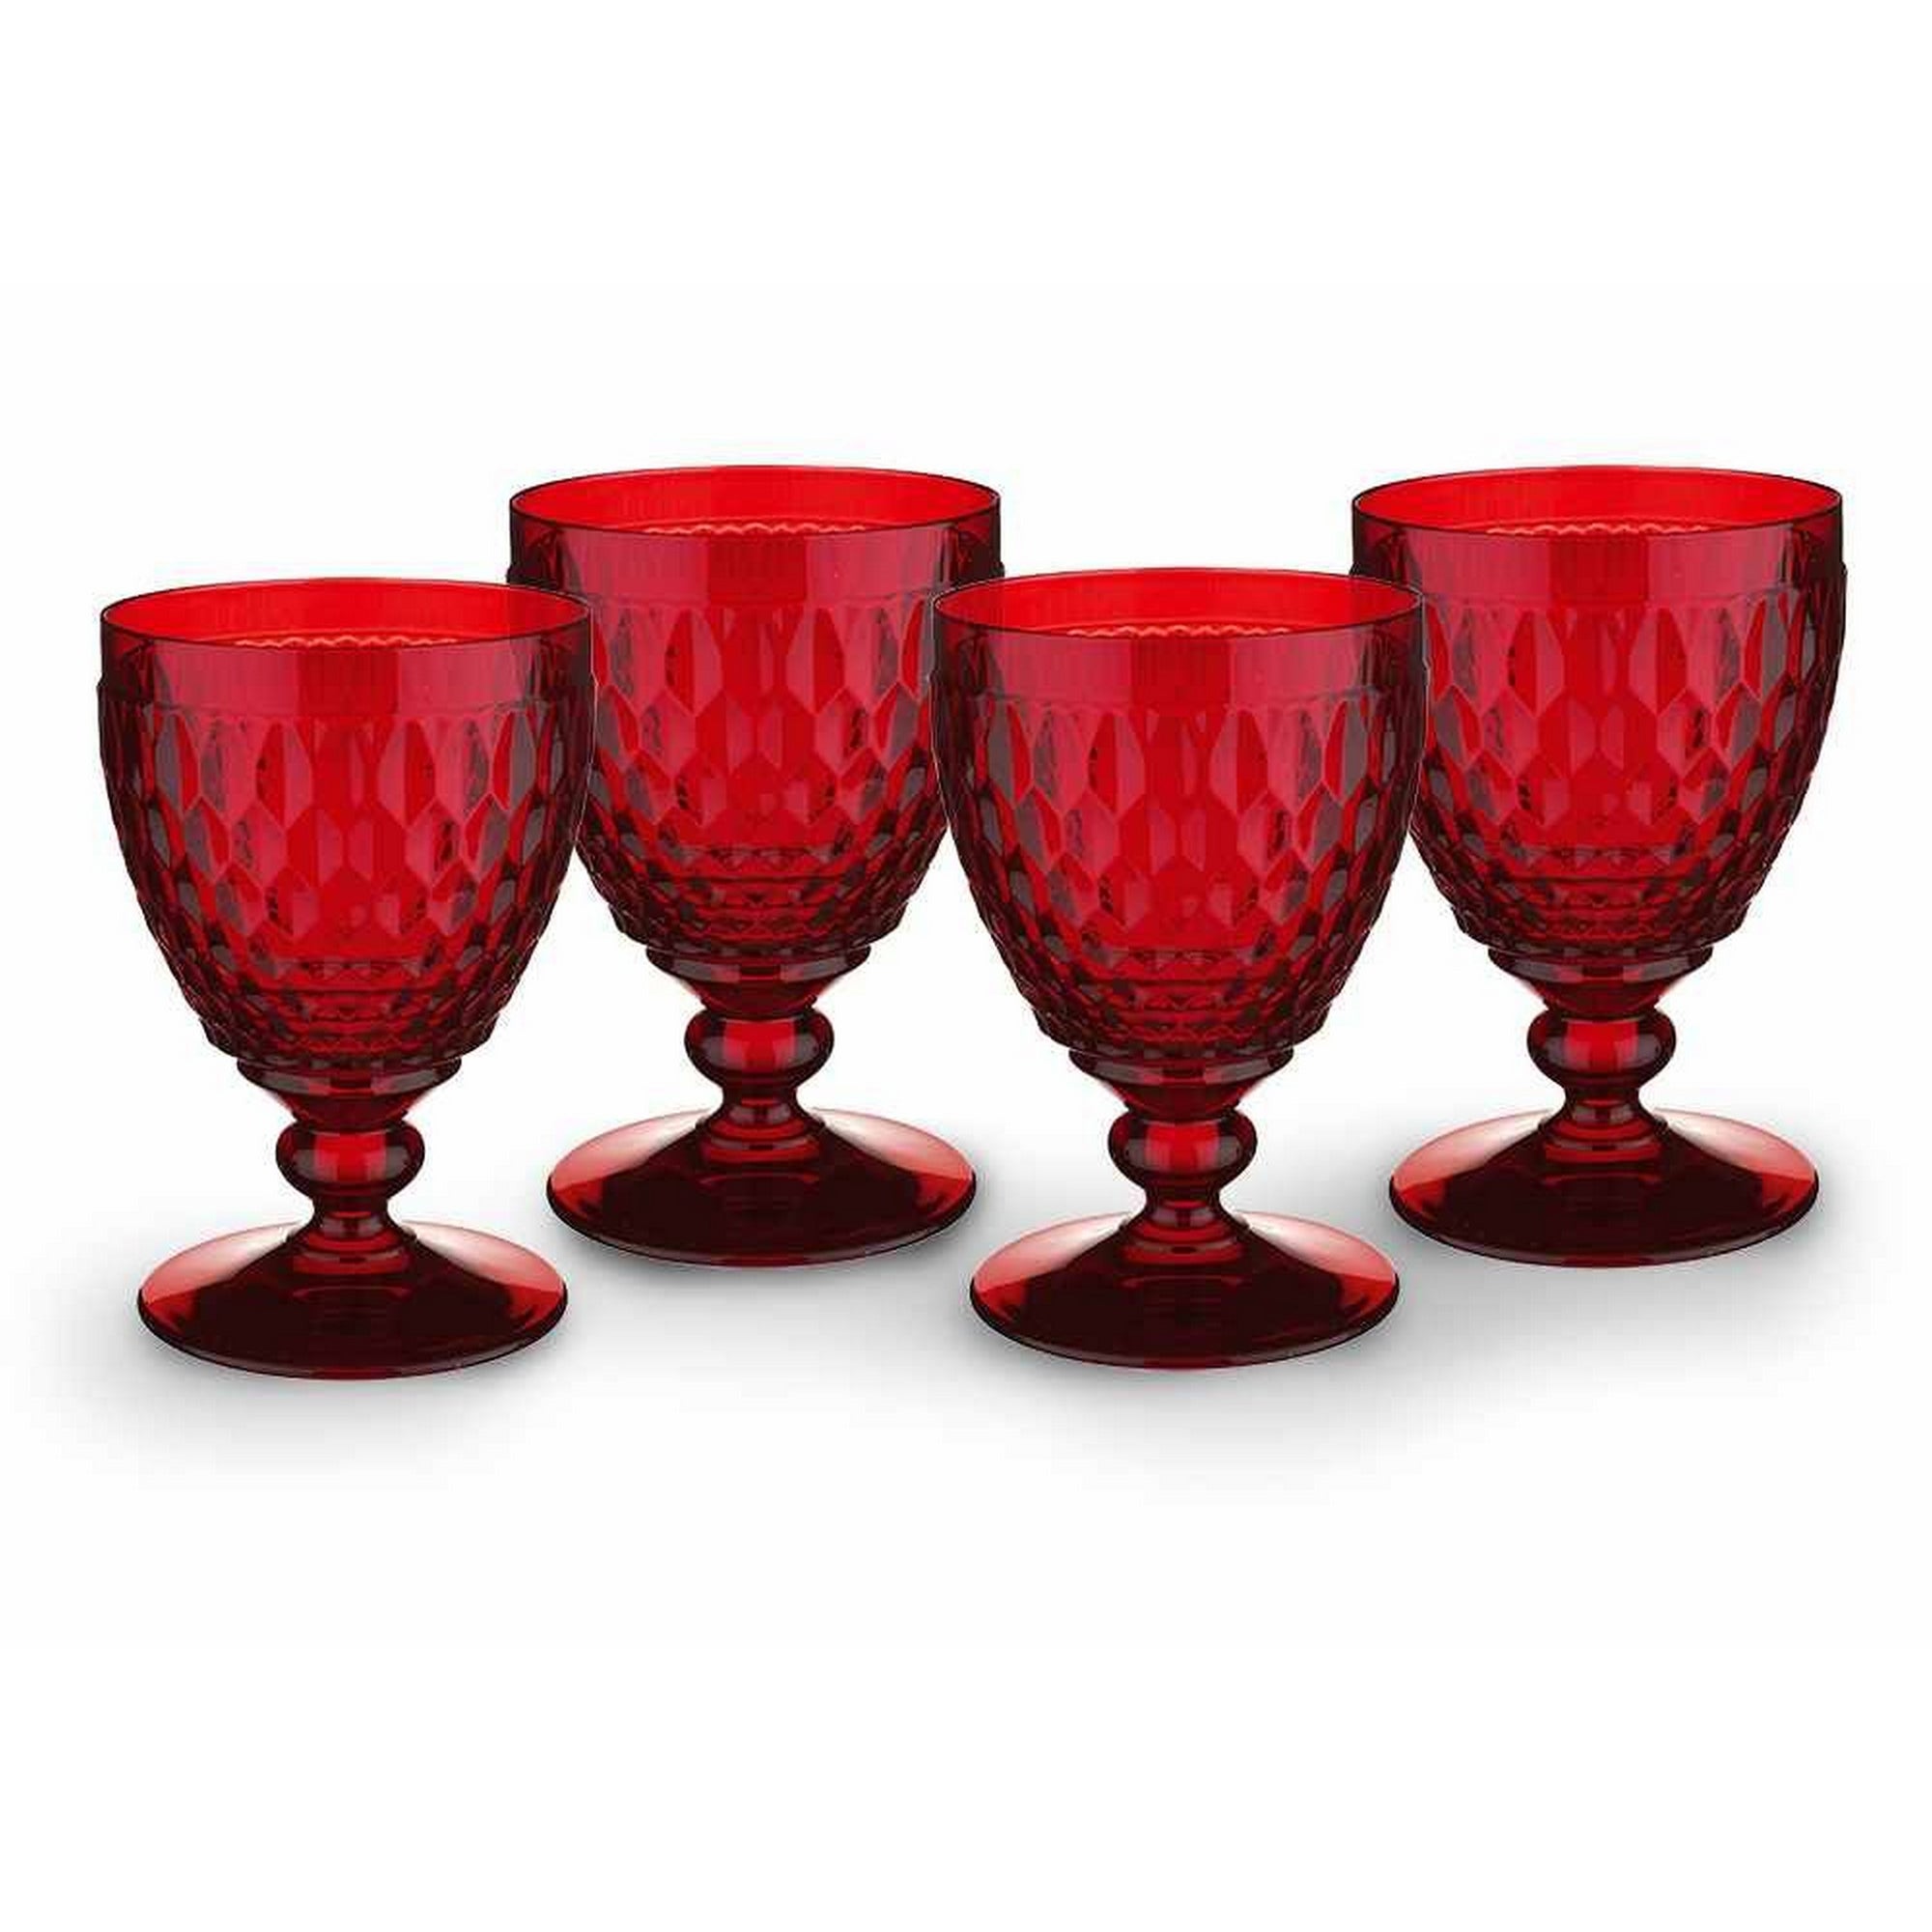 Villeroy & Boch Boston Colored Water Goblet Glasses, Set of 4,  Red,  14 oz